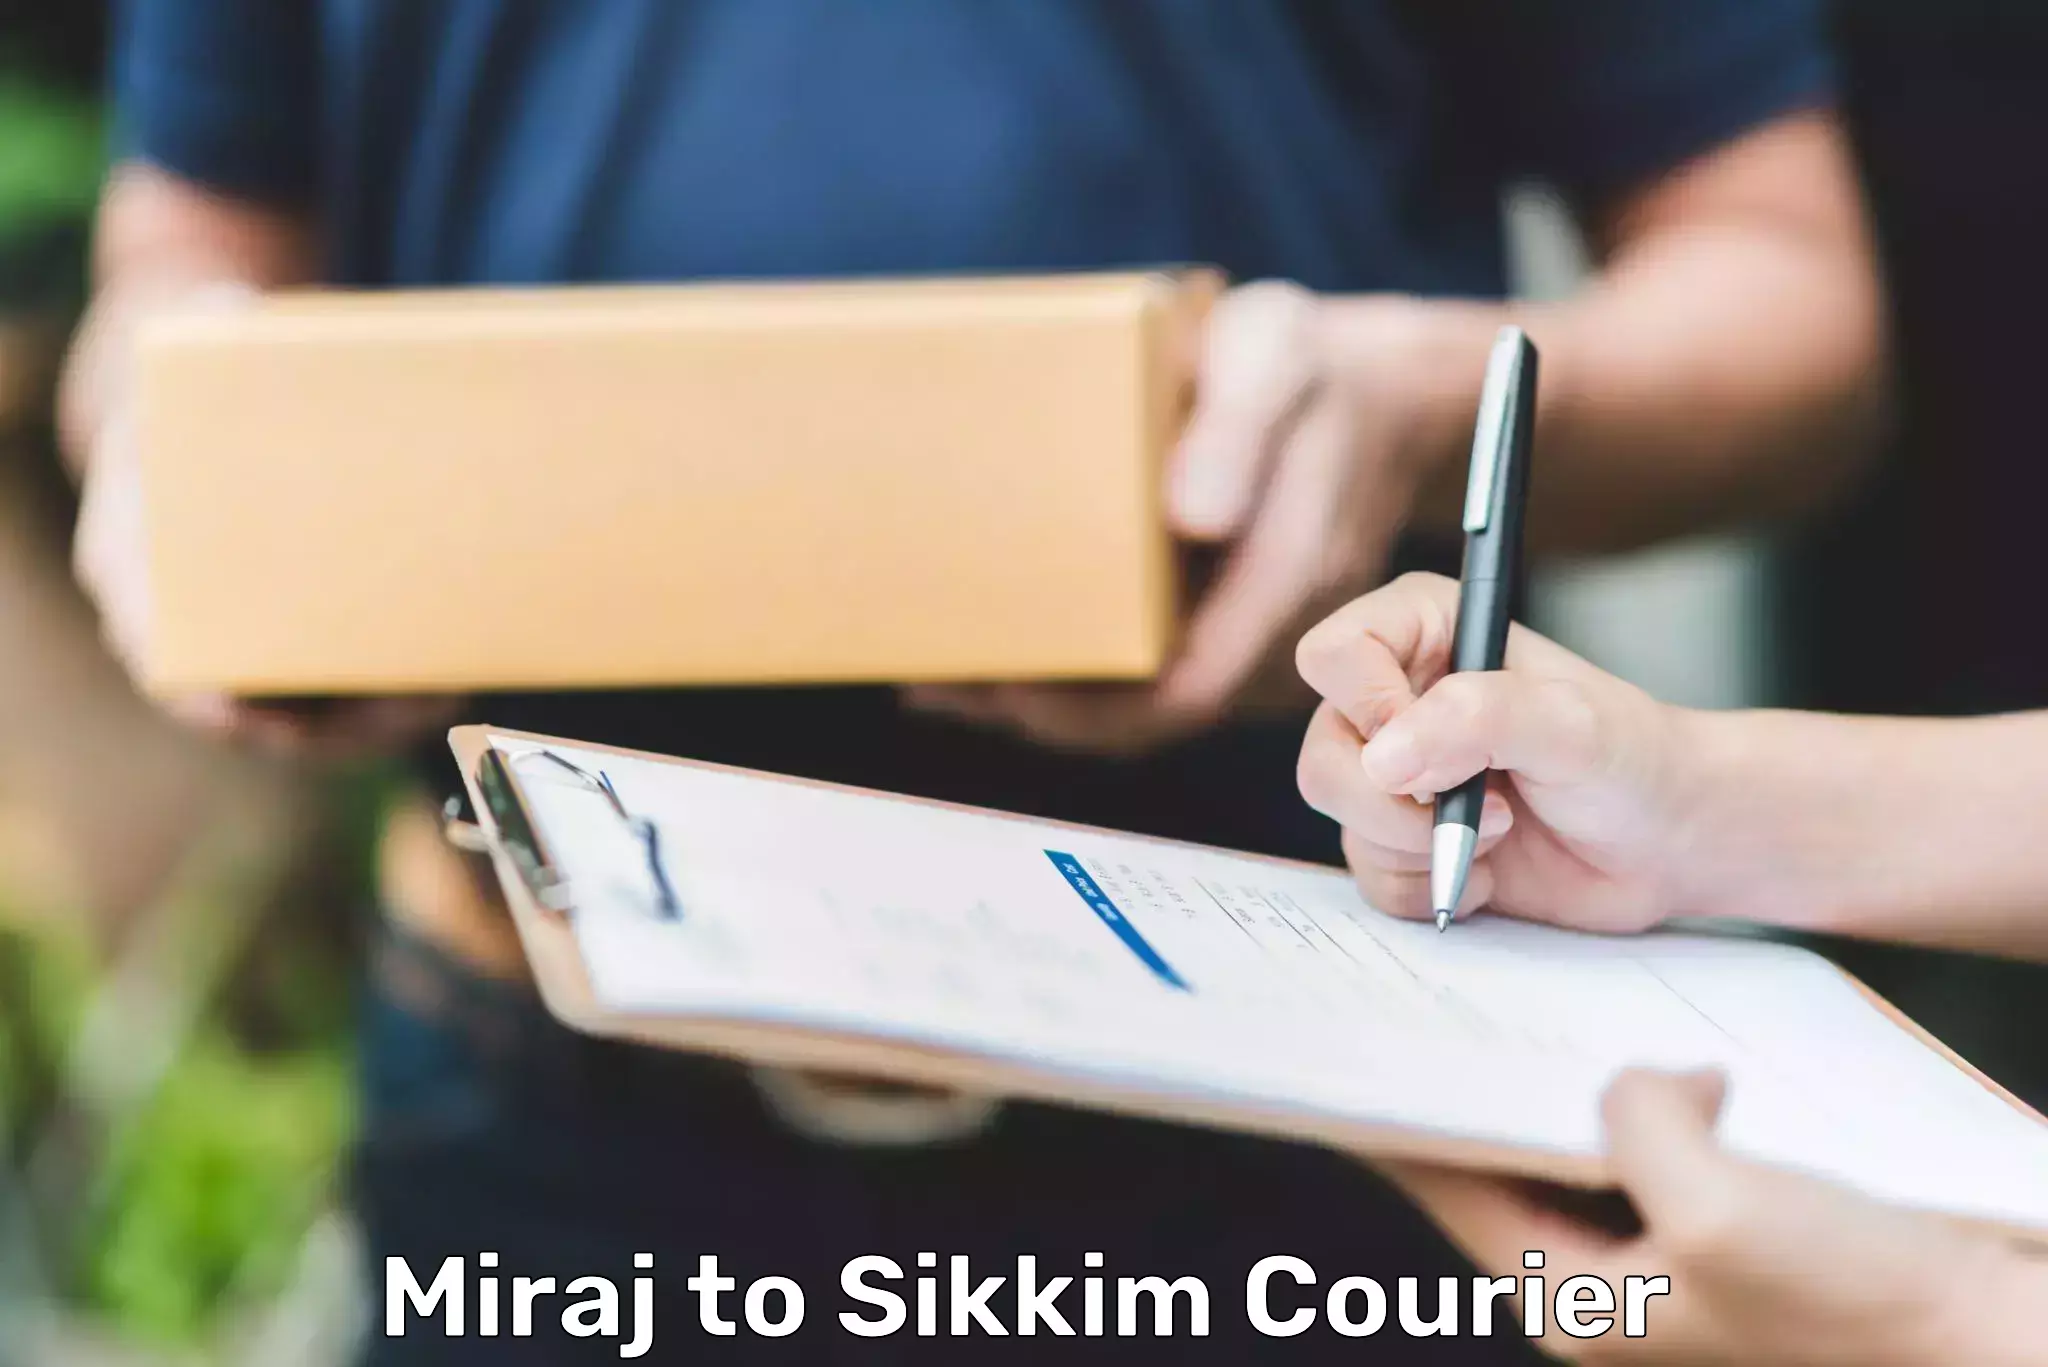 State-of-the-art courier technology Miraj to South Sikkim